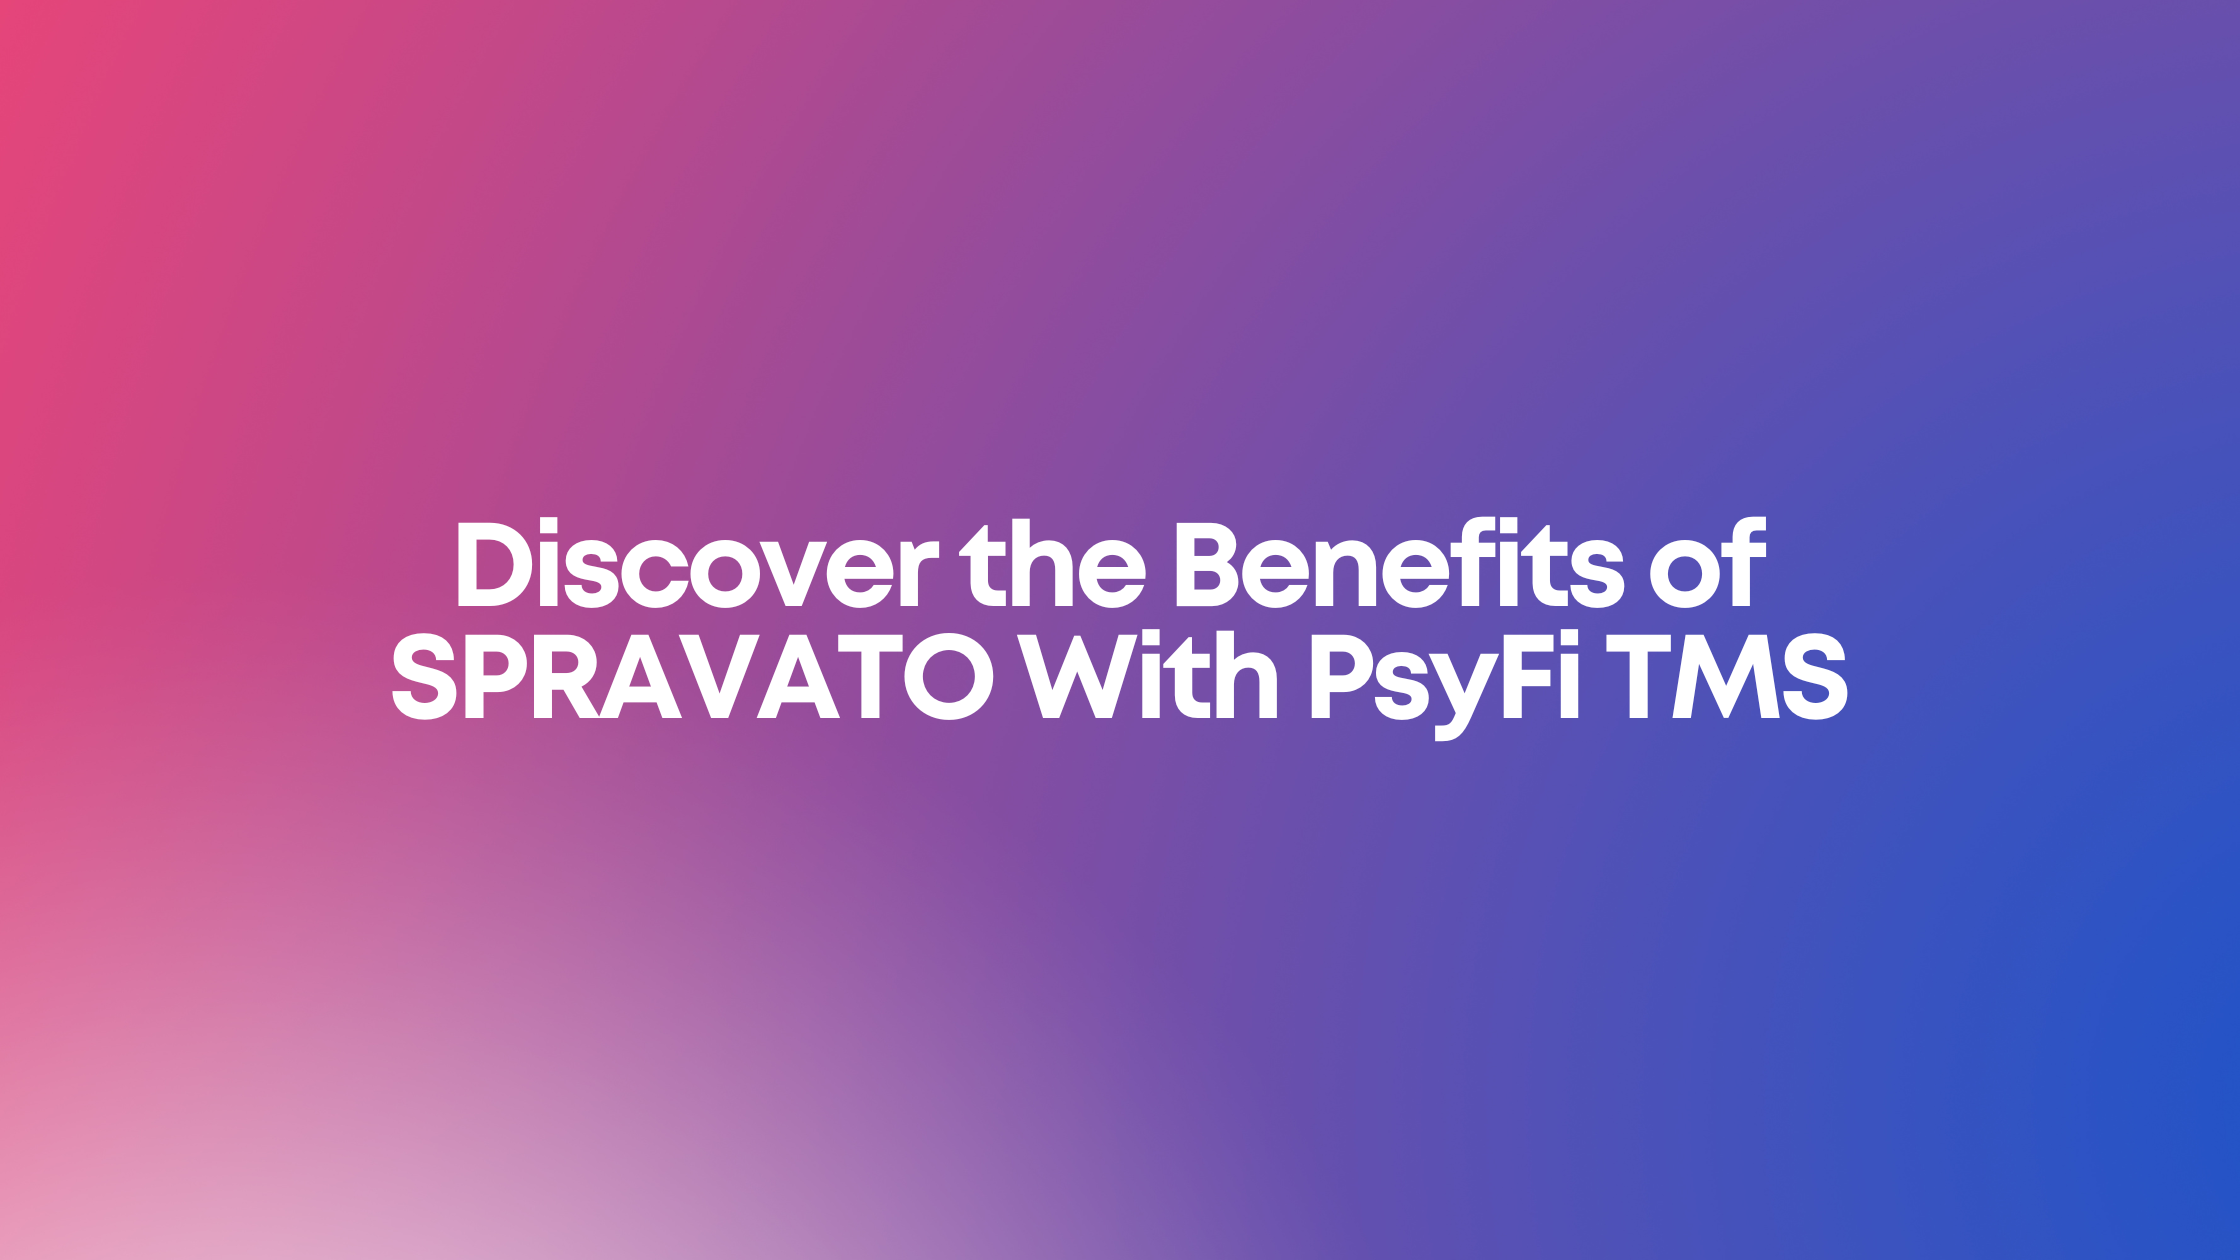 You are currently viewing Discover the Benefits of SPRAVATO With PsyFi TMS